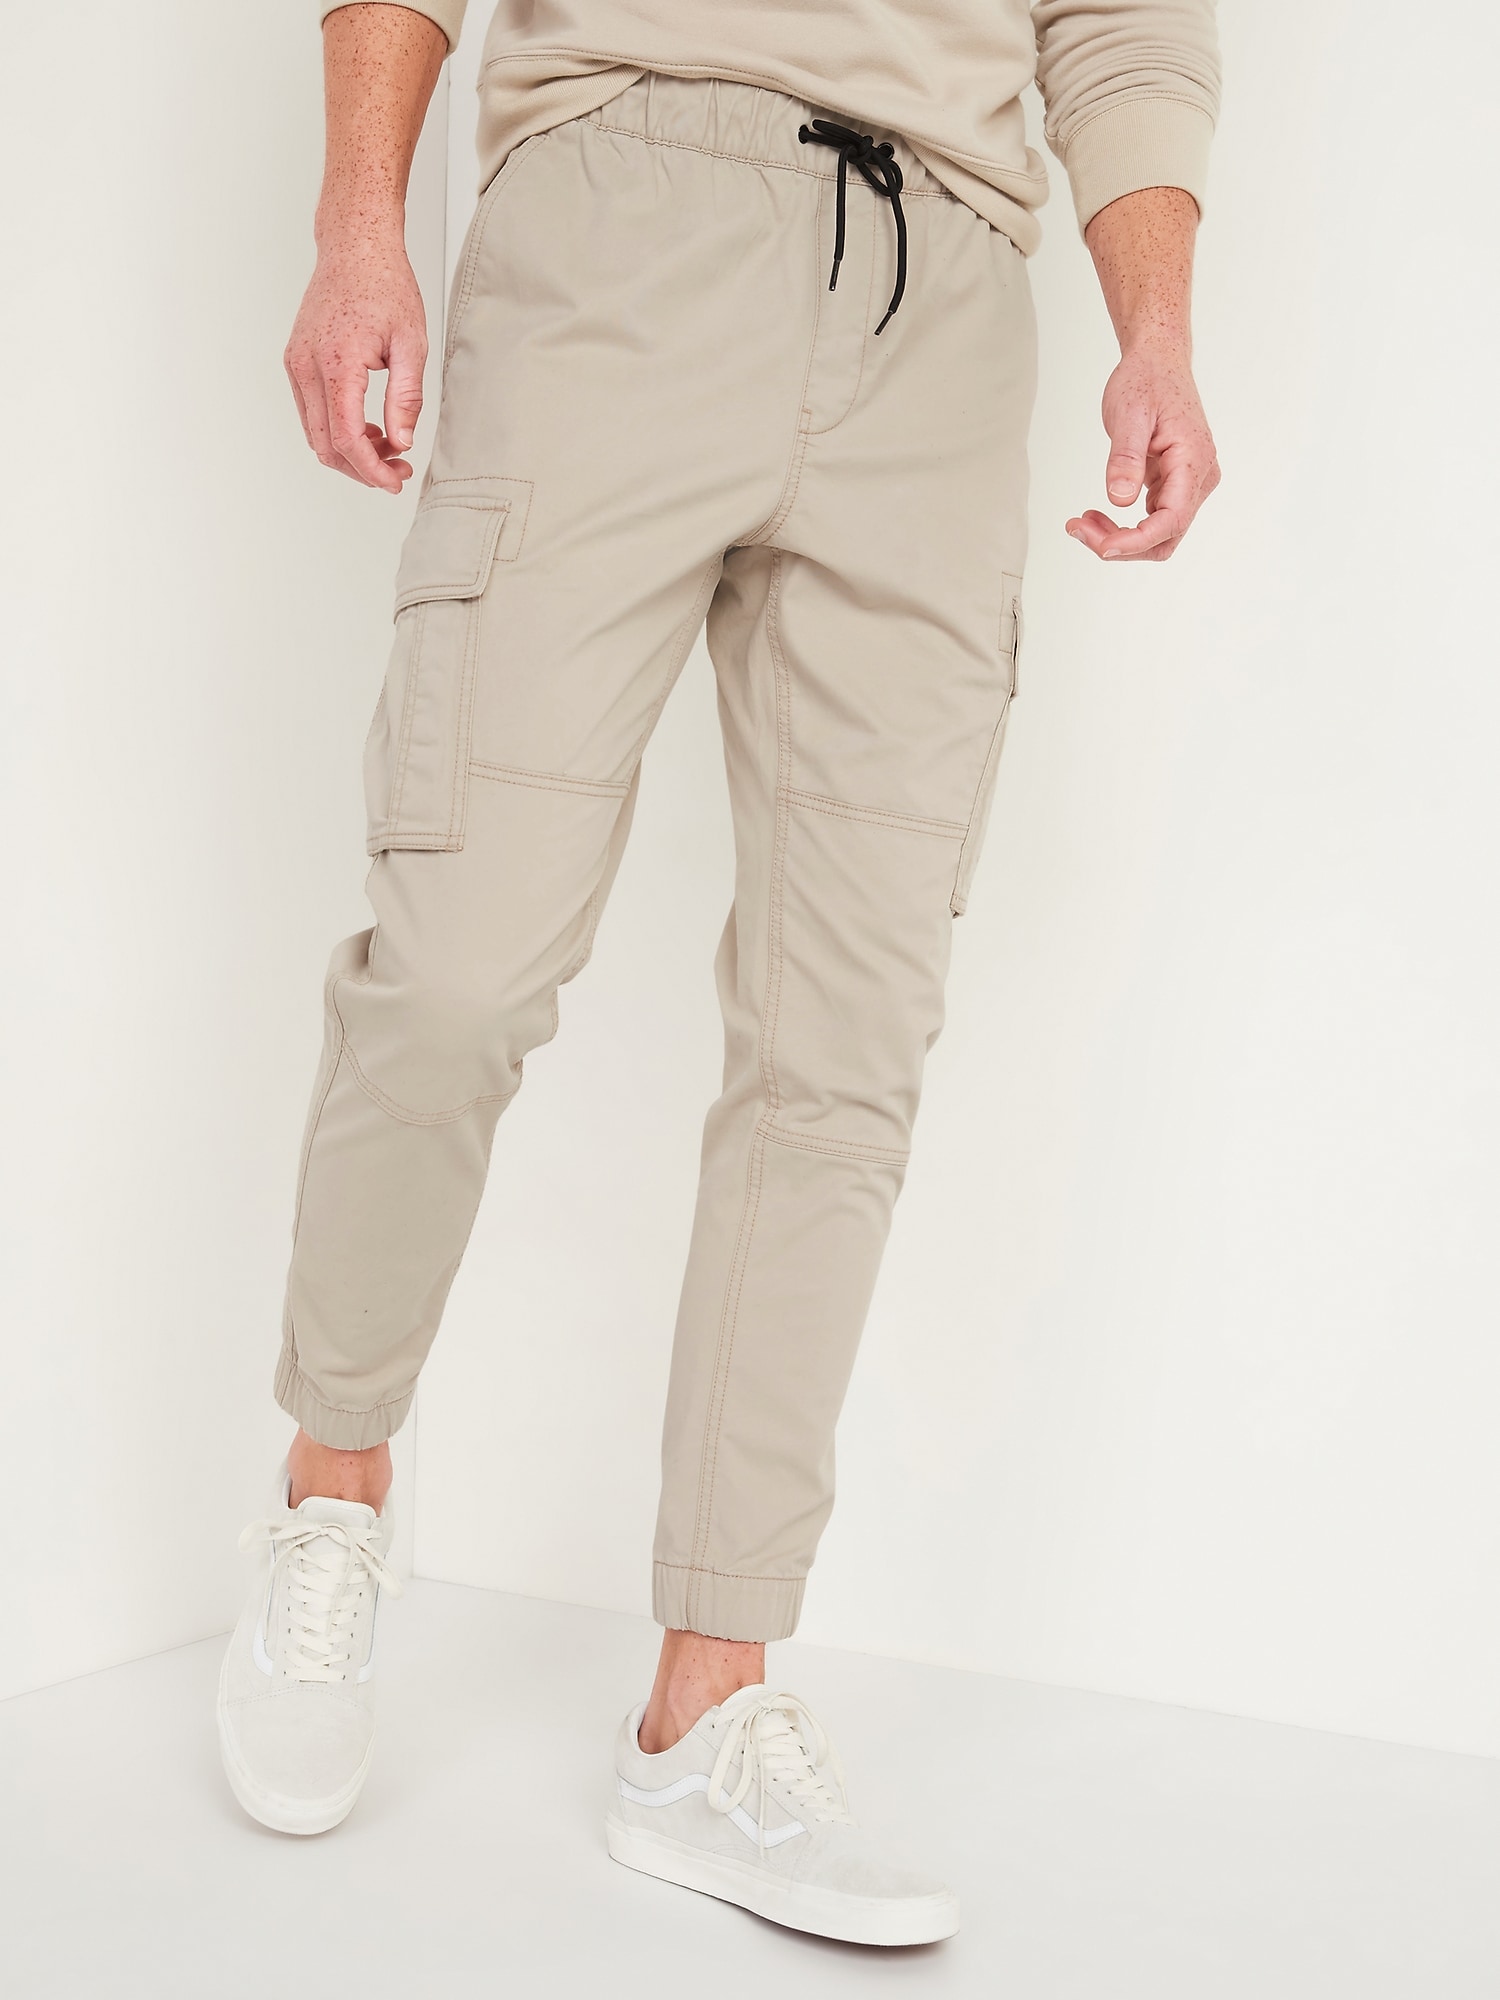 NWT Old Navy Mens Built-In Flex Modern Jogger Cargo Pants XS (29